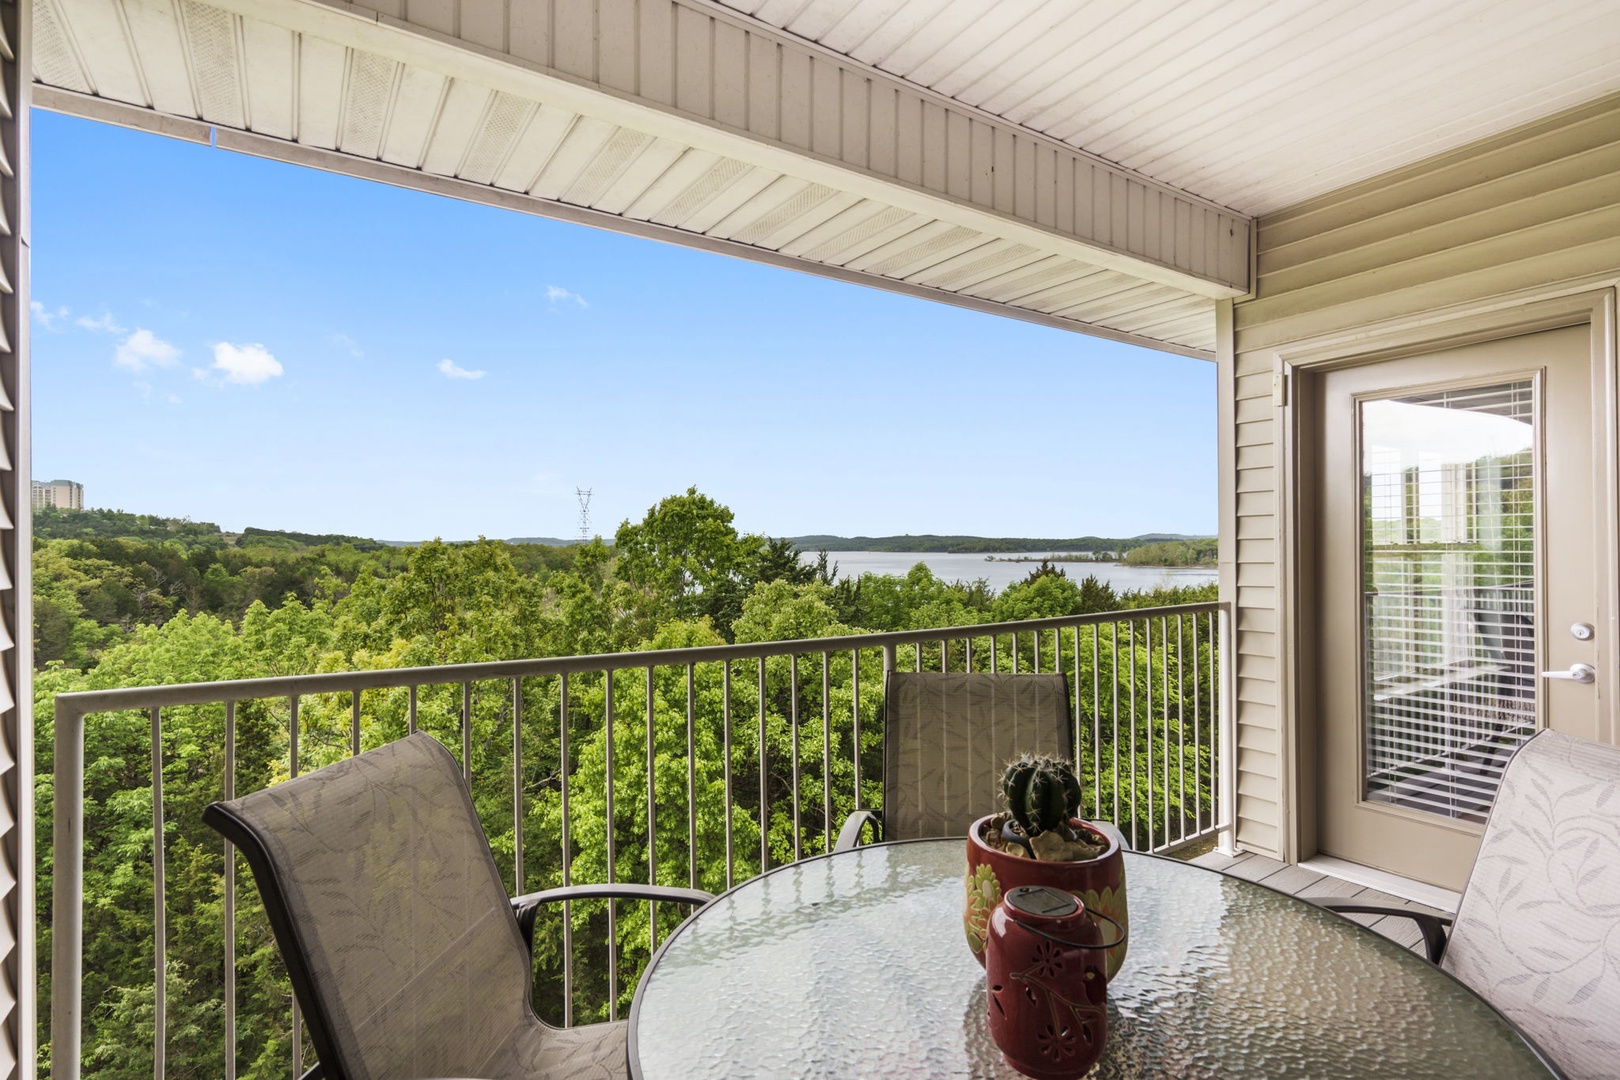 Relish fresh breezes and stunning views from the Balcony